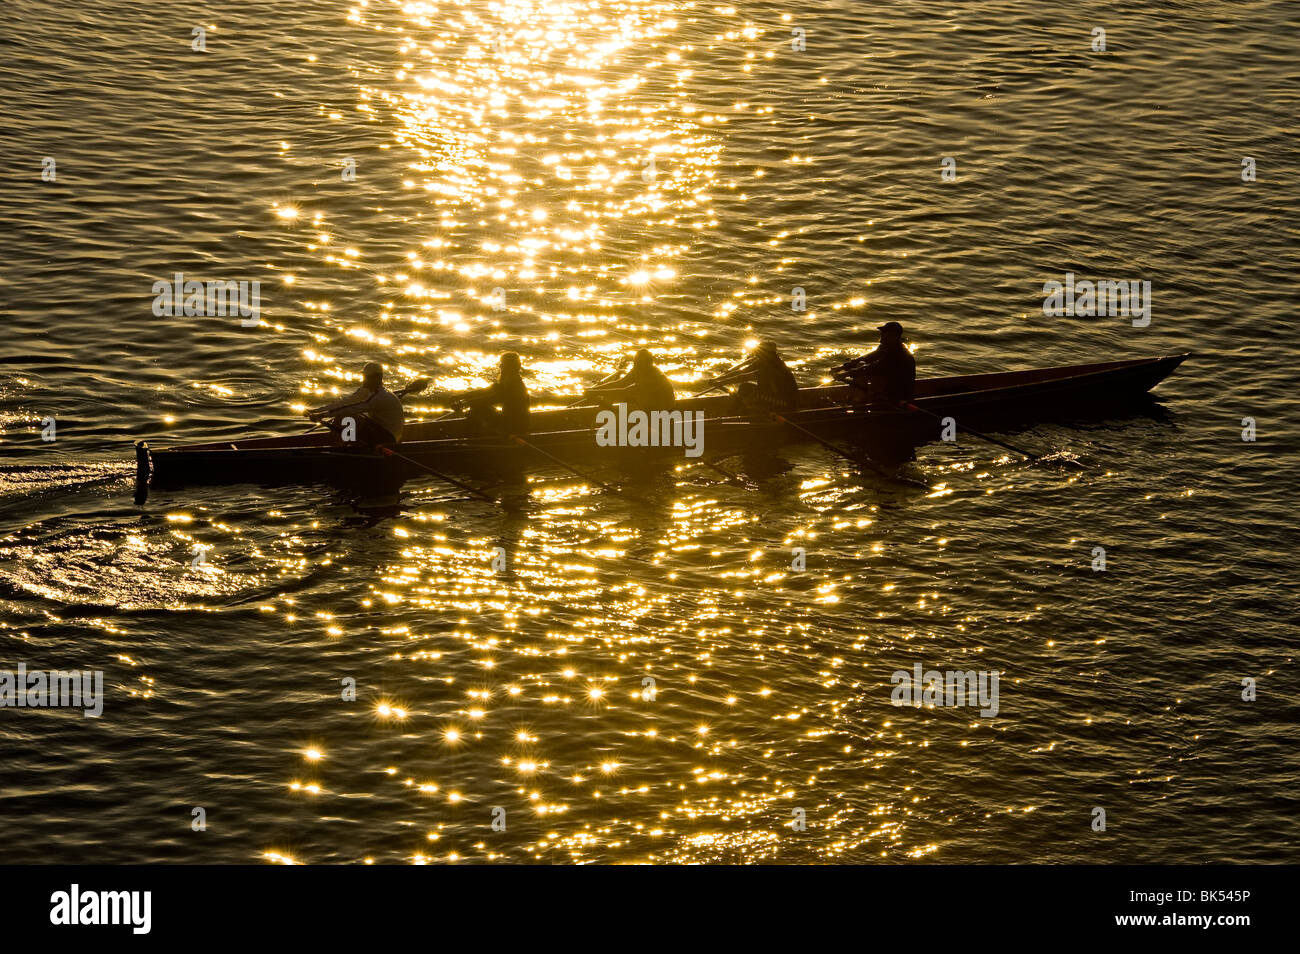 oarsman rower sculler row rowing sports paddle paddling at sundown sunset sun light sunny  backlight water river gold golden yel Stock Photo